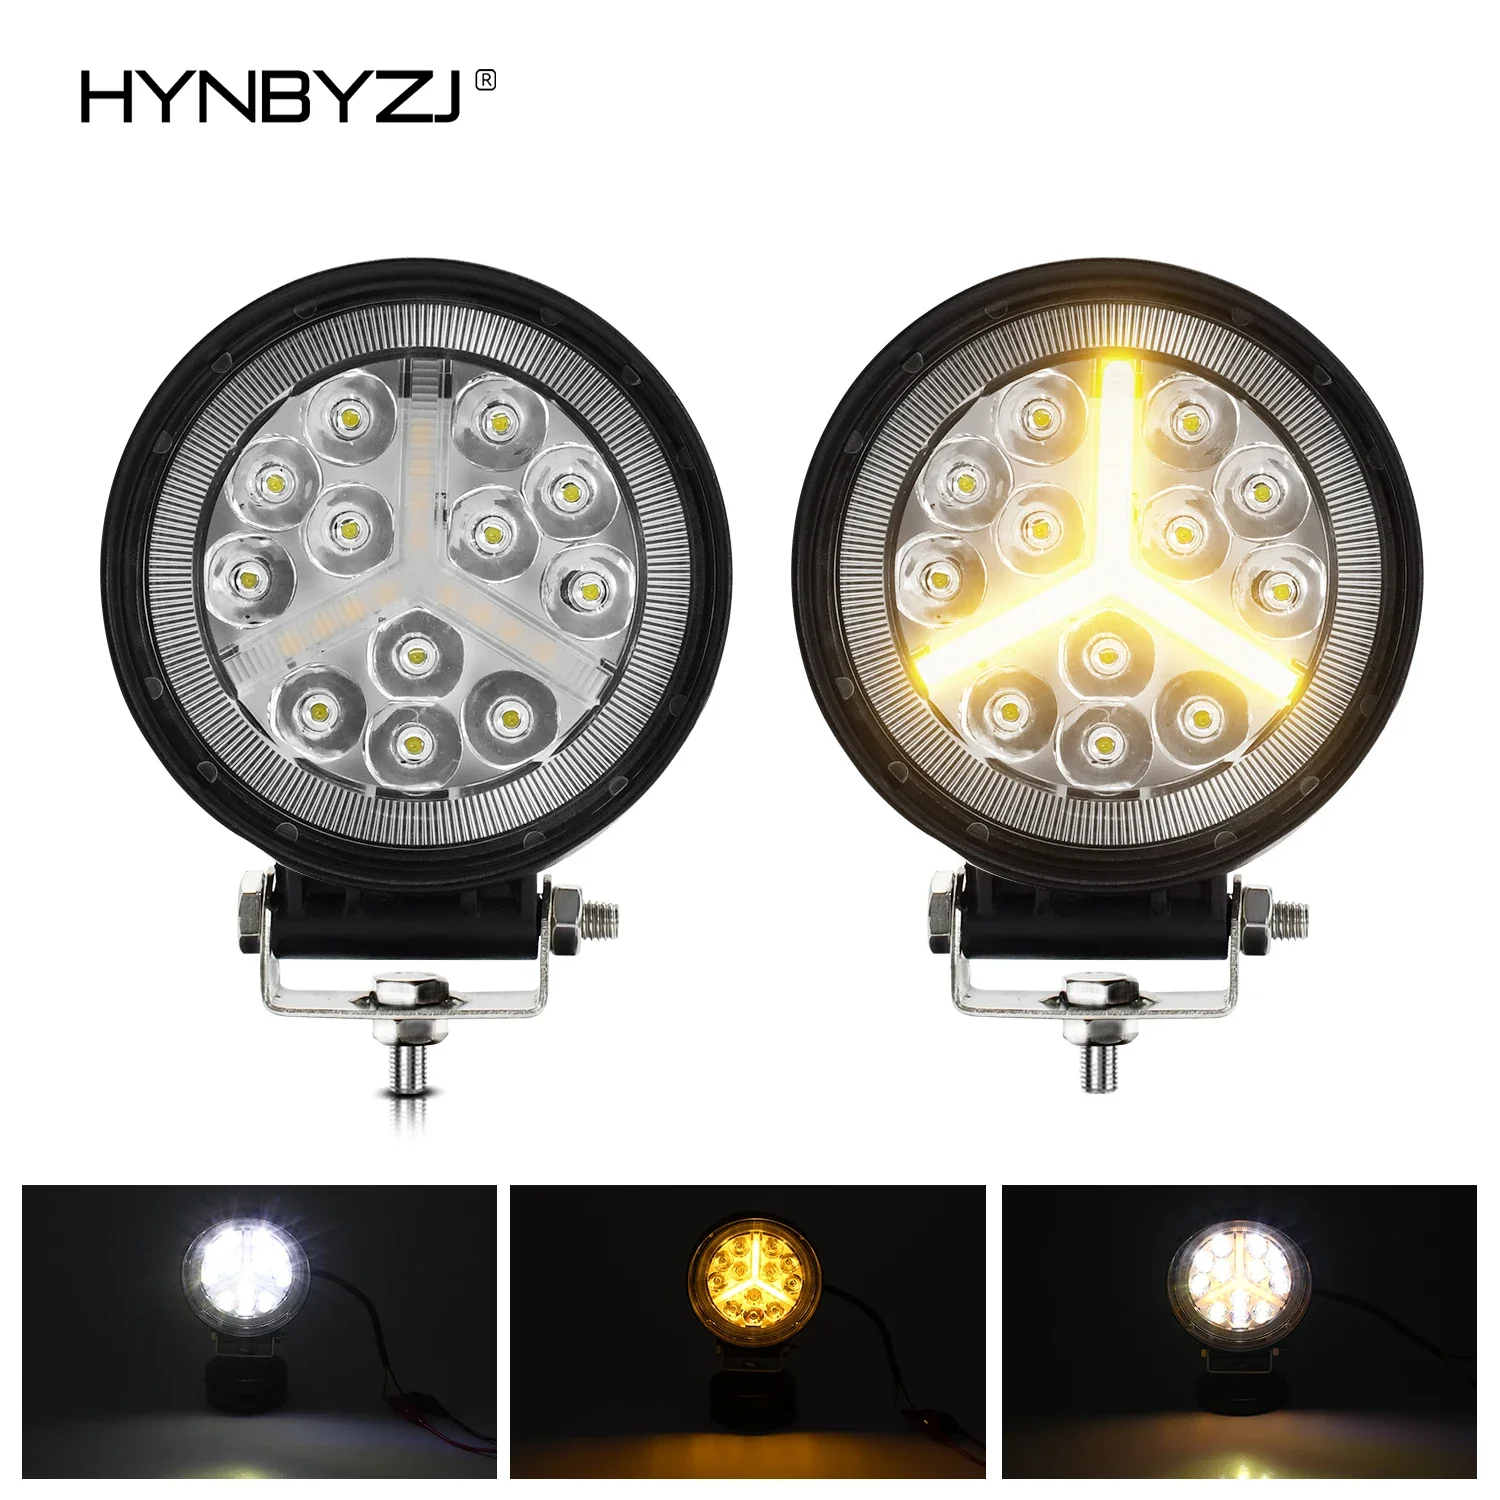 

HYNBYZJ 2pcs 4 Inch 200W LED Work Light Round Offroad Work Light DRL Driving Lamp with Line Jeep Wrangler Motorcycle Fog Lights